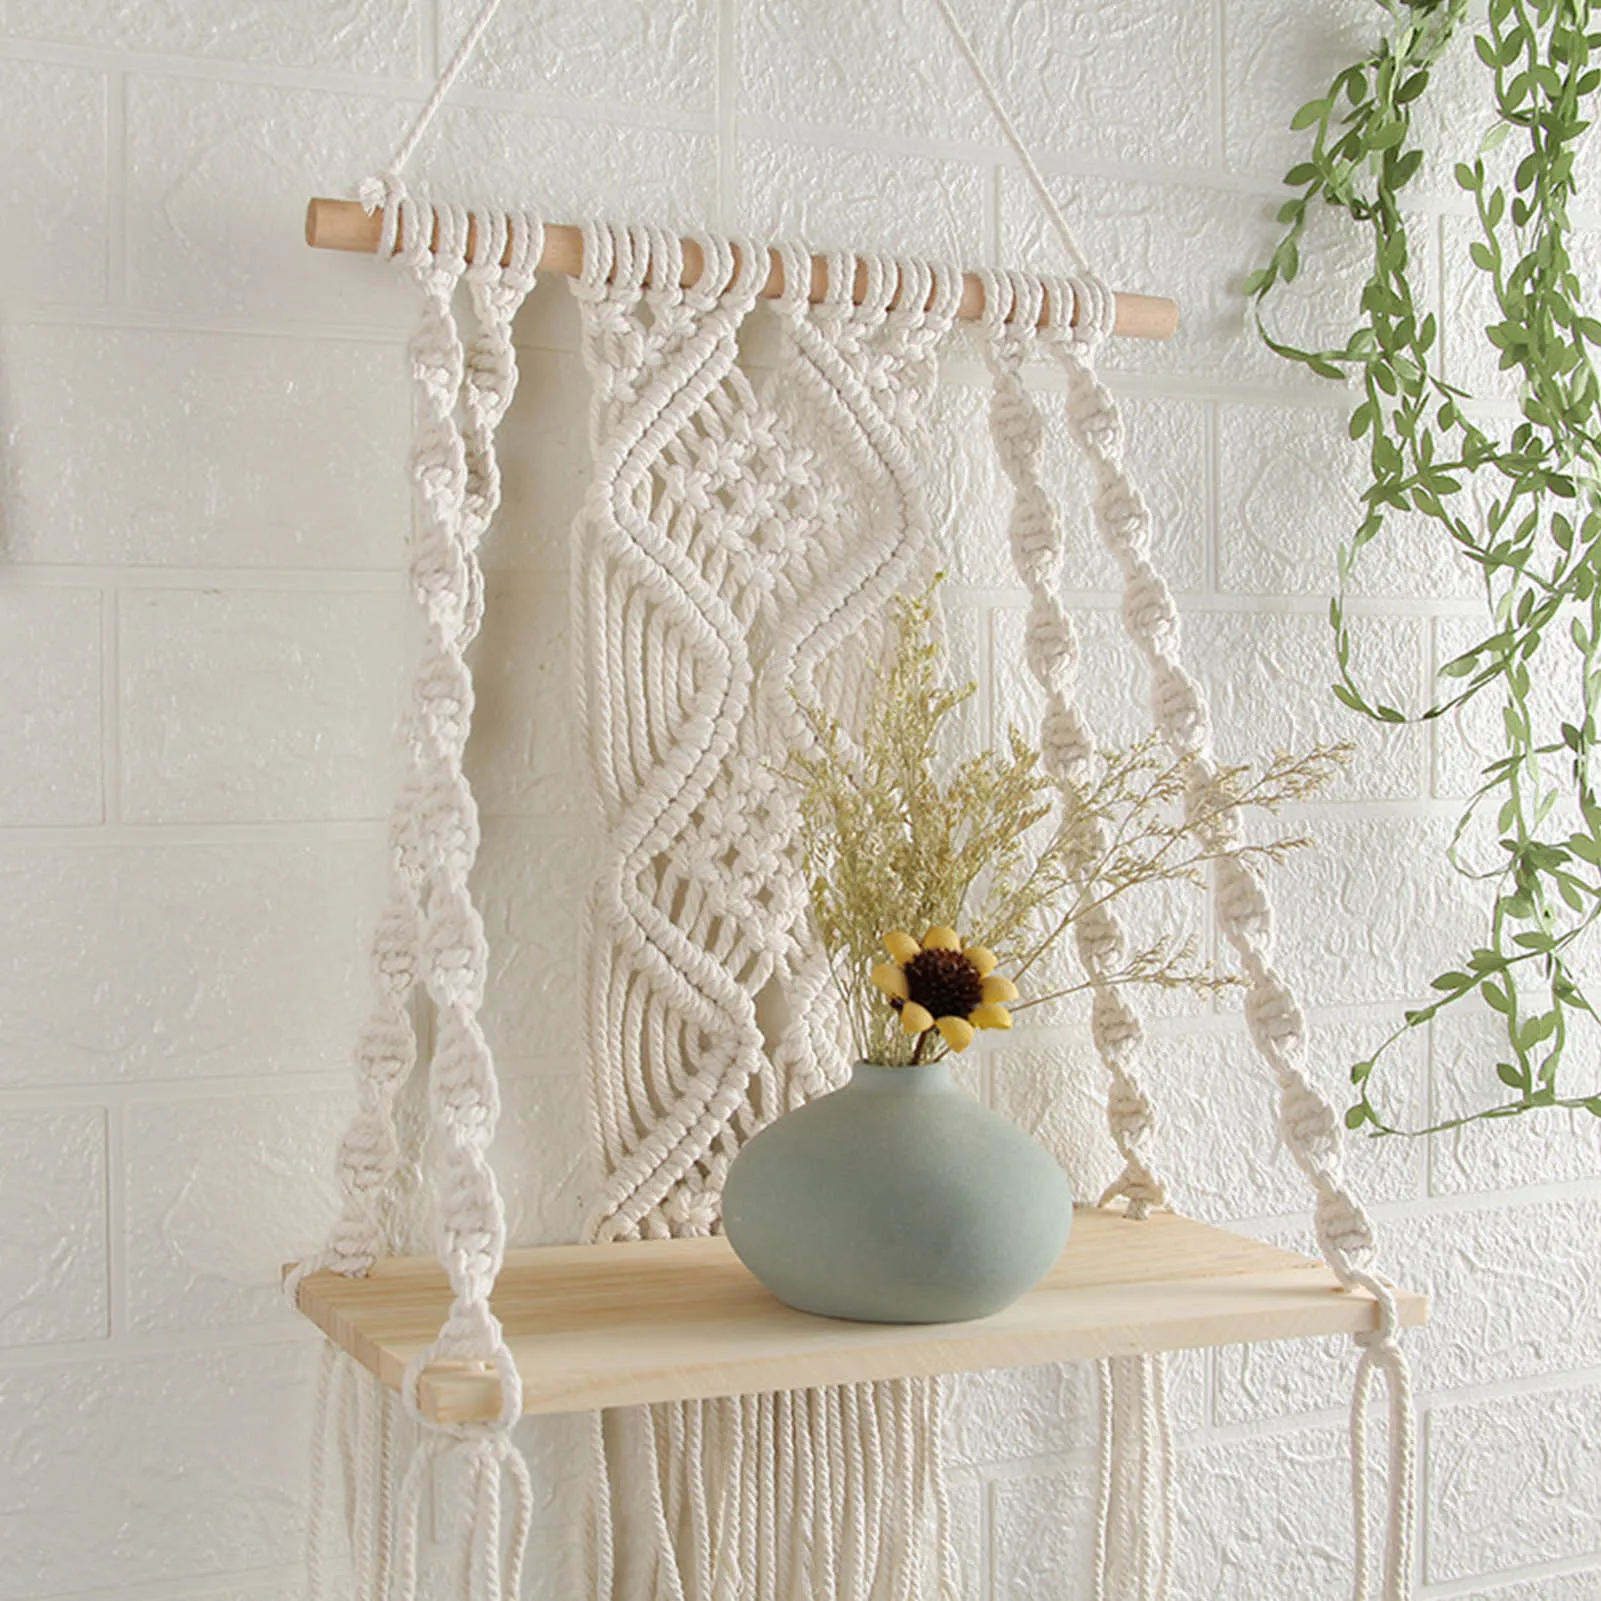 Wall Hanging Tapestry Boho Chic Macrame Cotton Rope Bohemian Tapestry Home Décor 